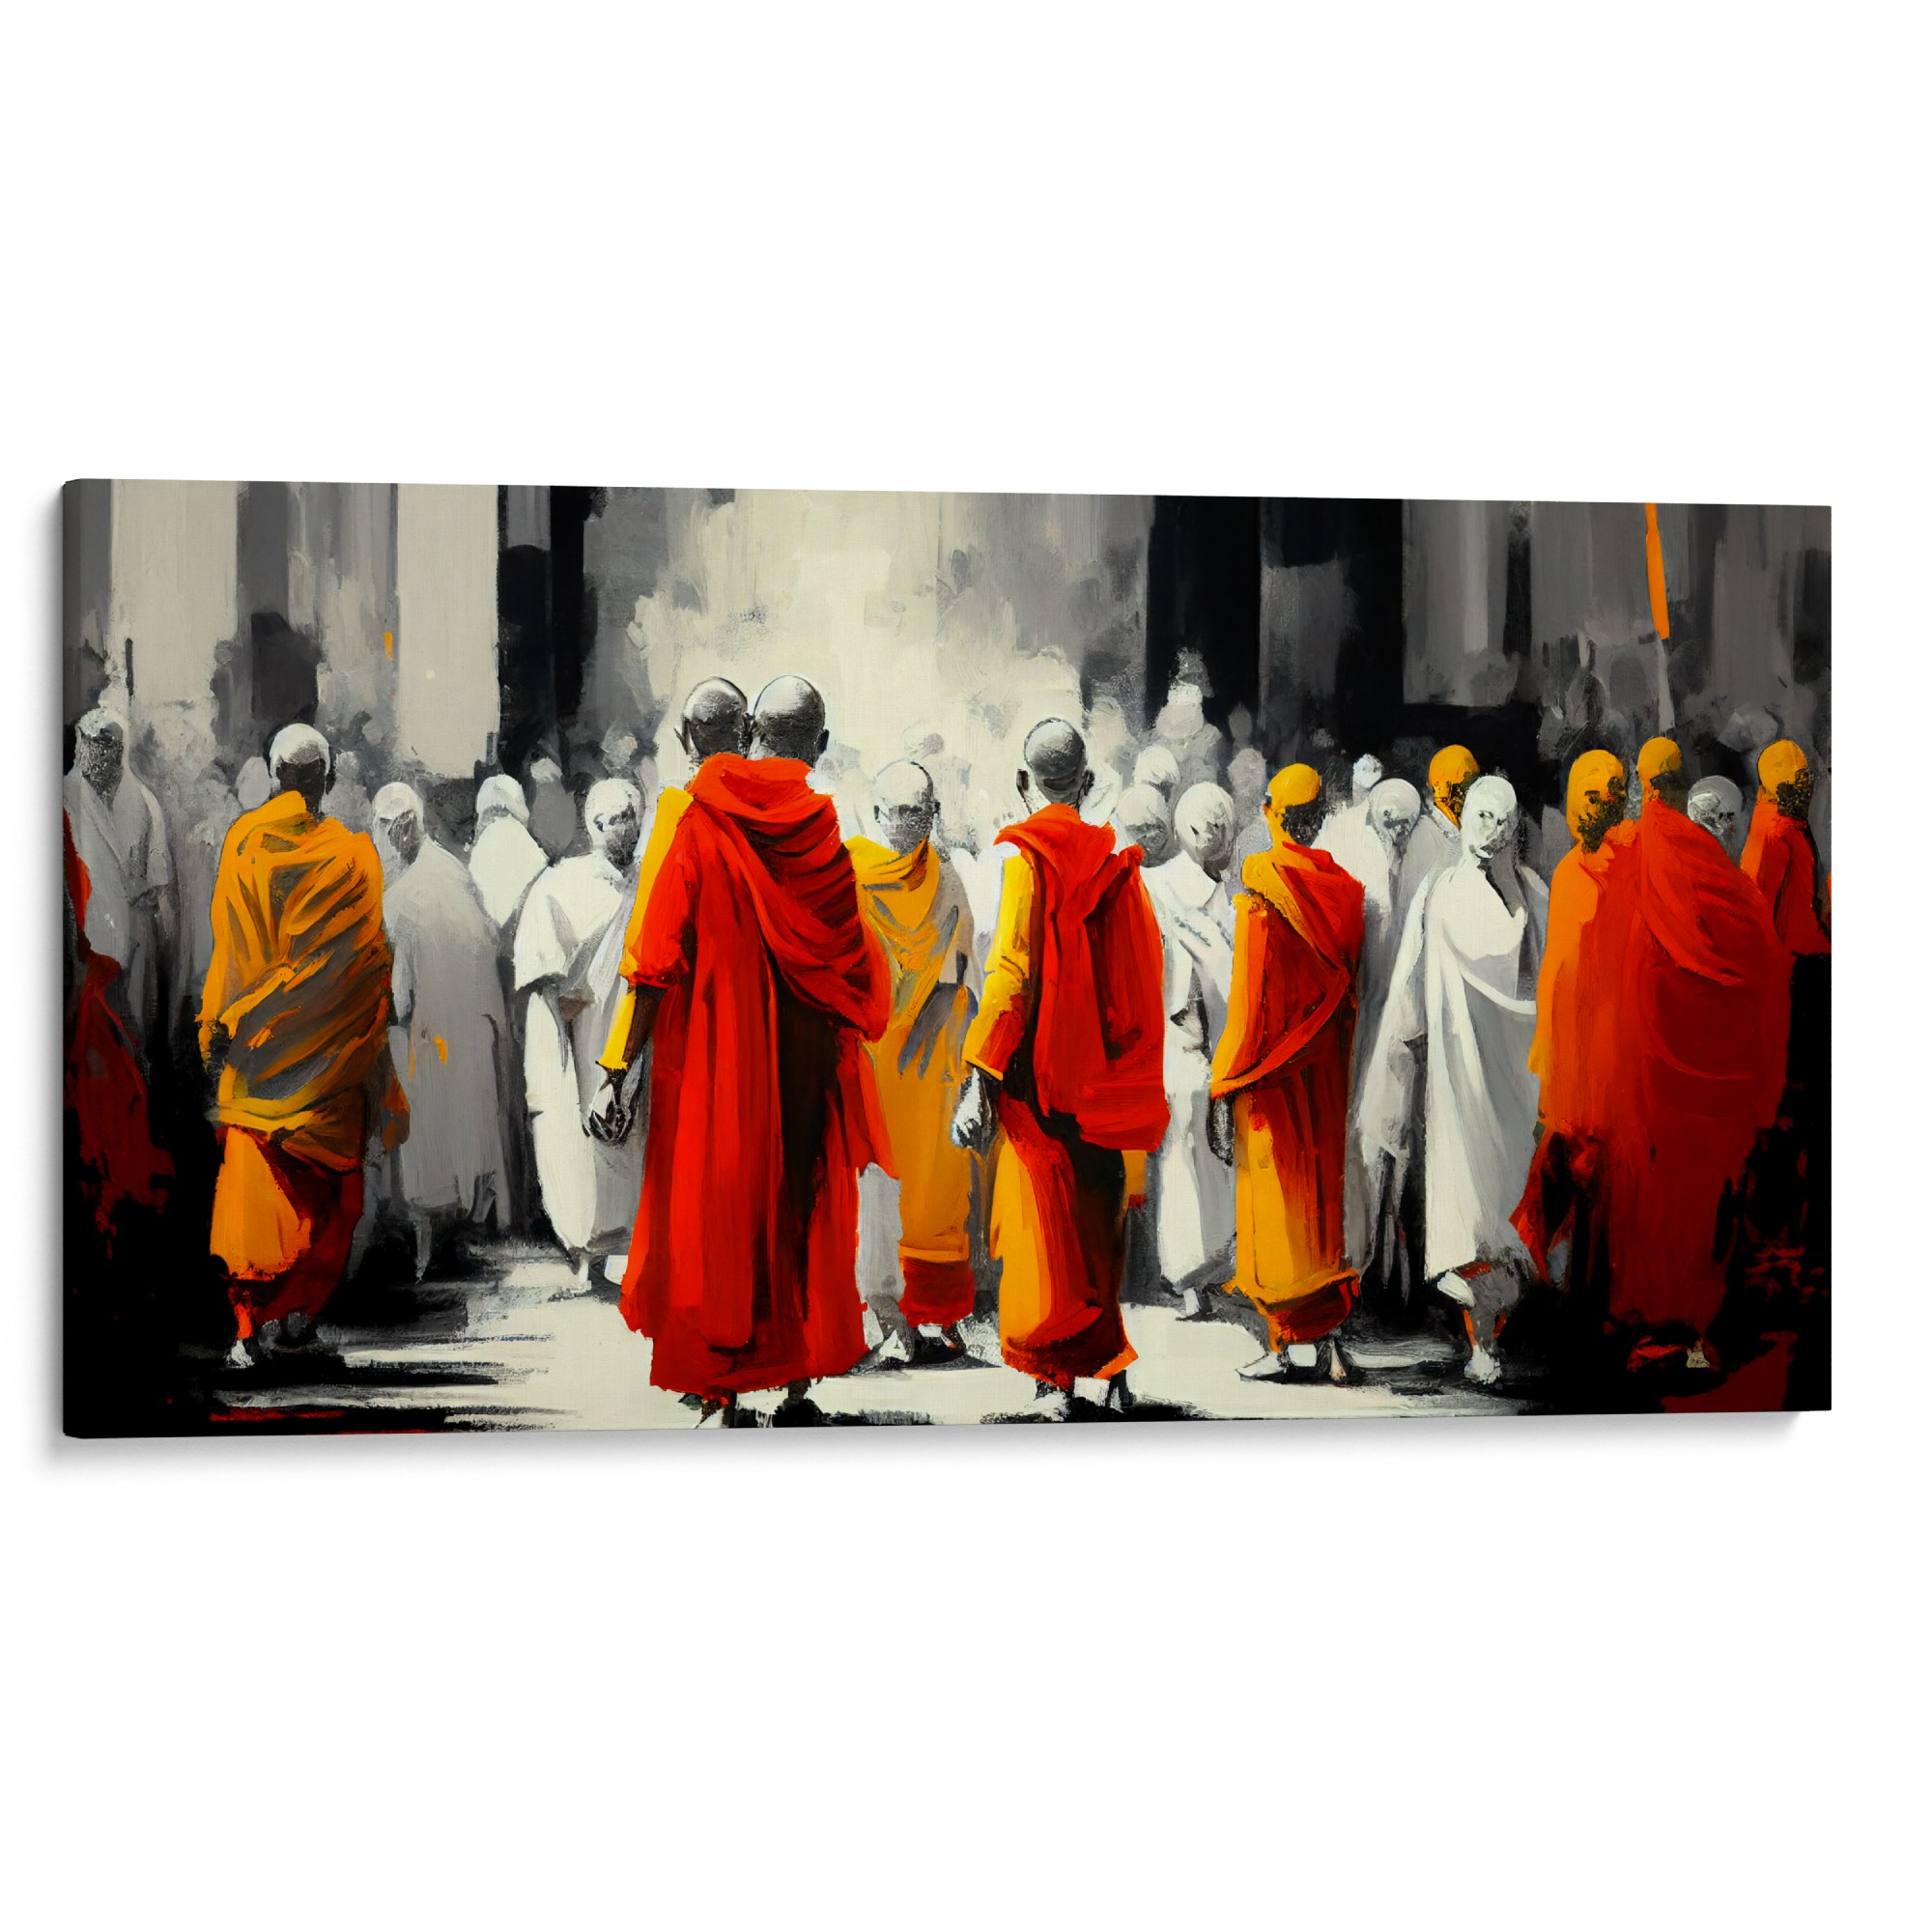 SILENCE SPEAKS Canvas - Monks sharing moments, a symbol of community and shared purpose.